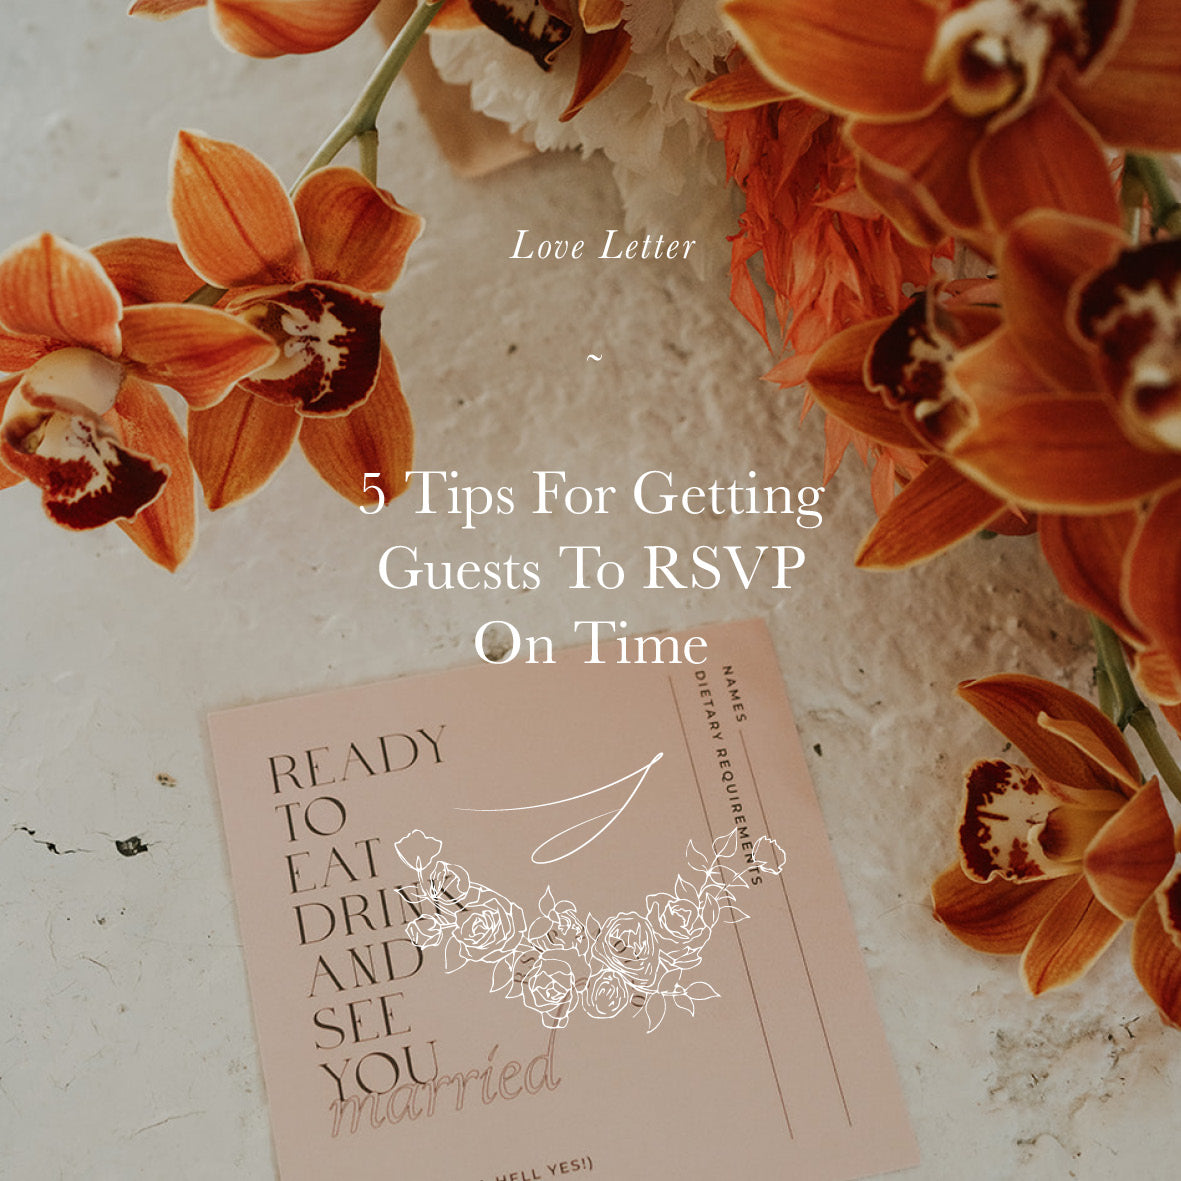 5 Tips For Getting Guests To RSVP On Time